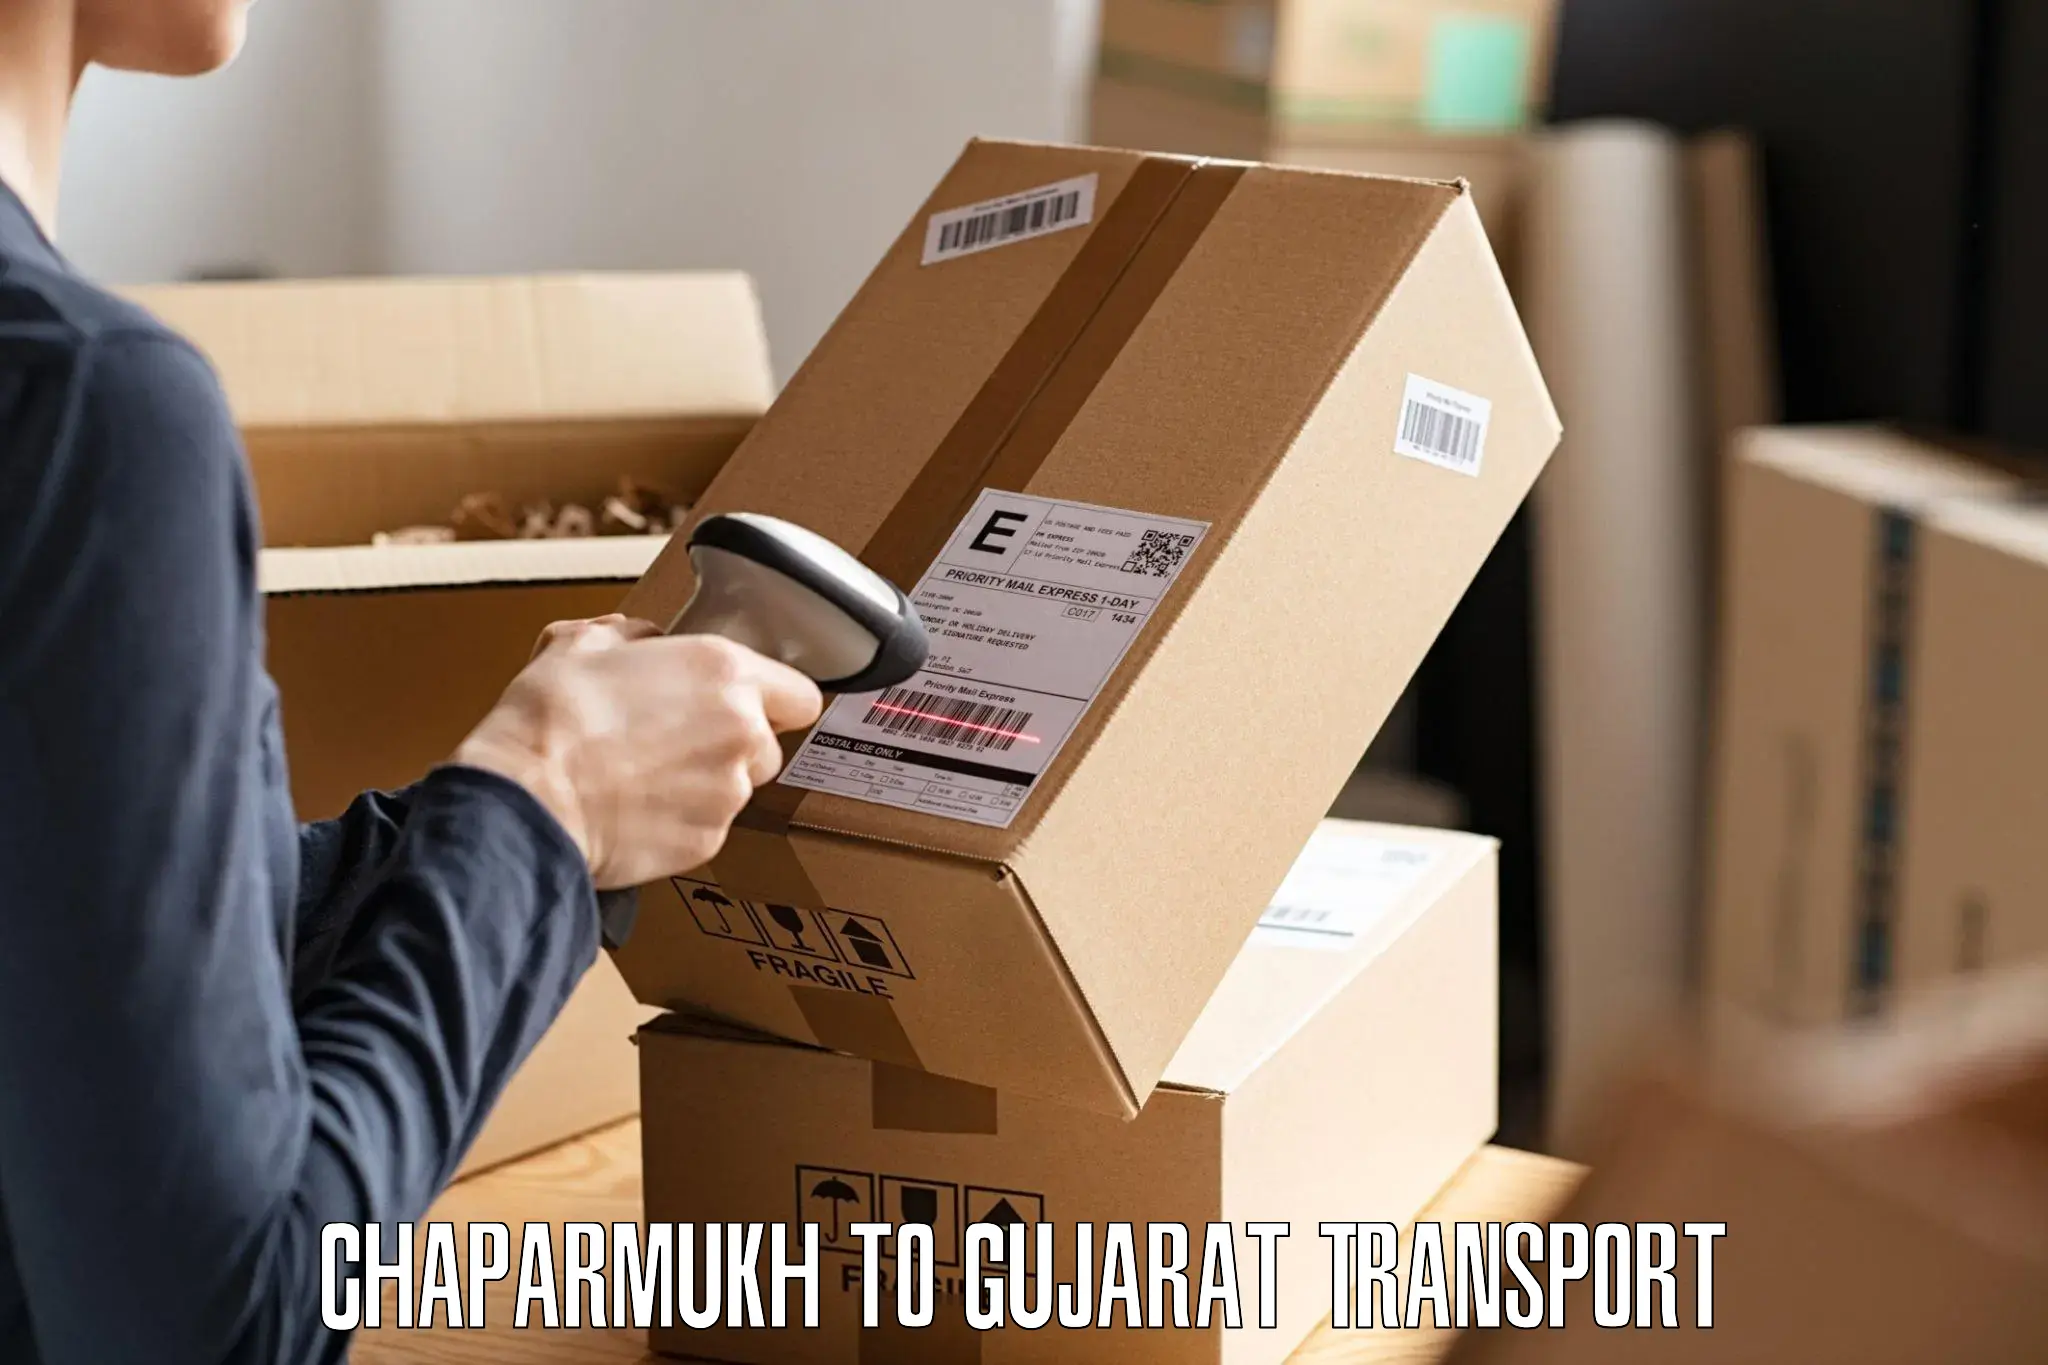 Air cargo transport services Chaparmukh to Gondal